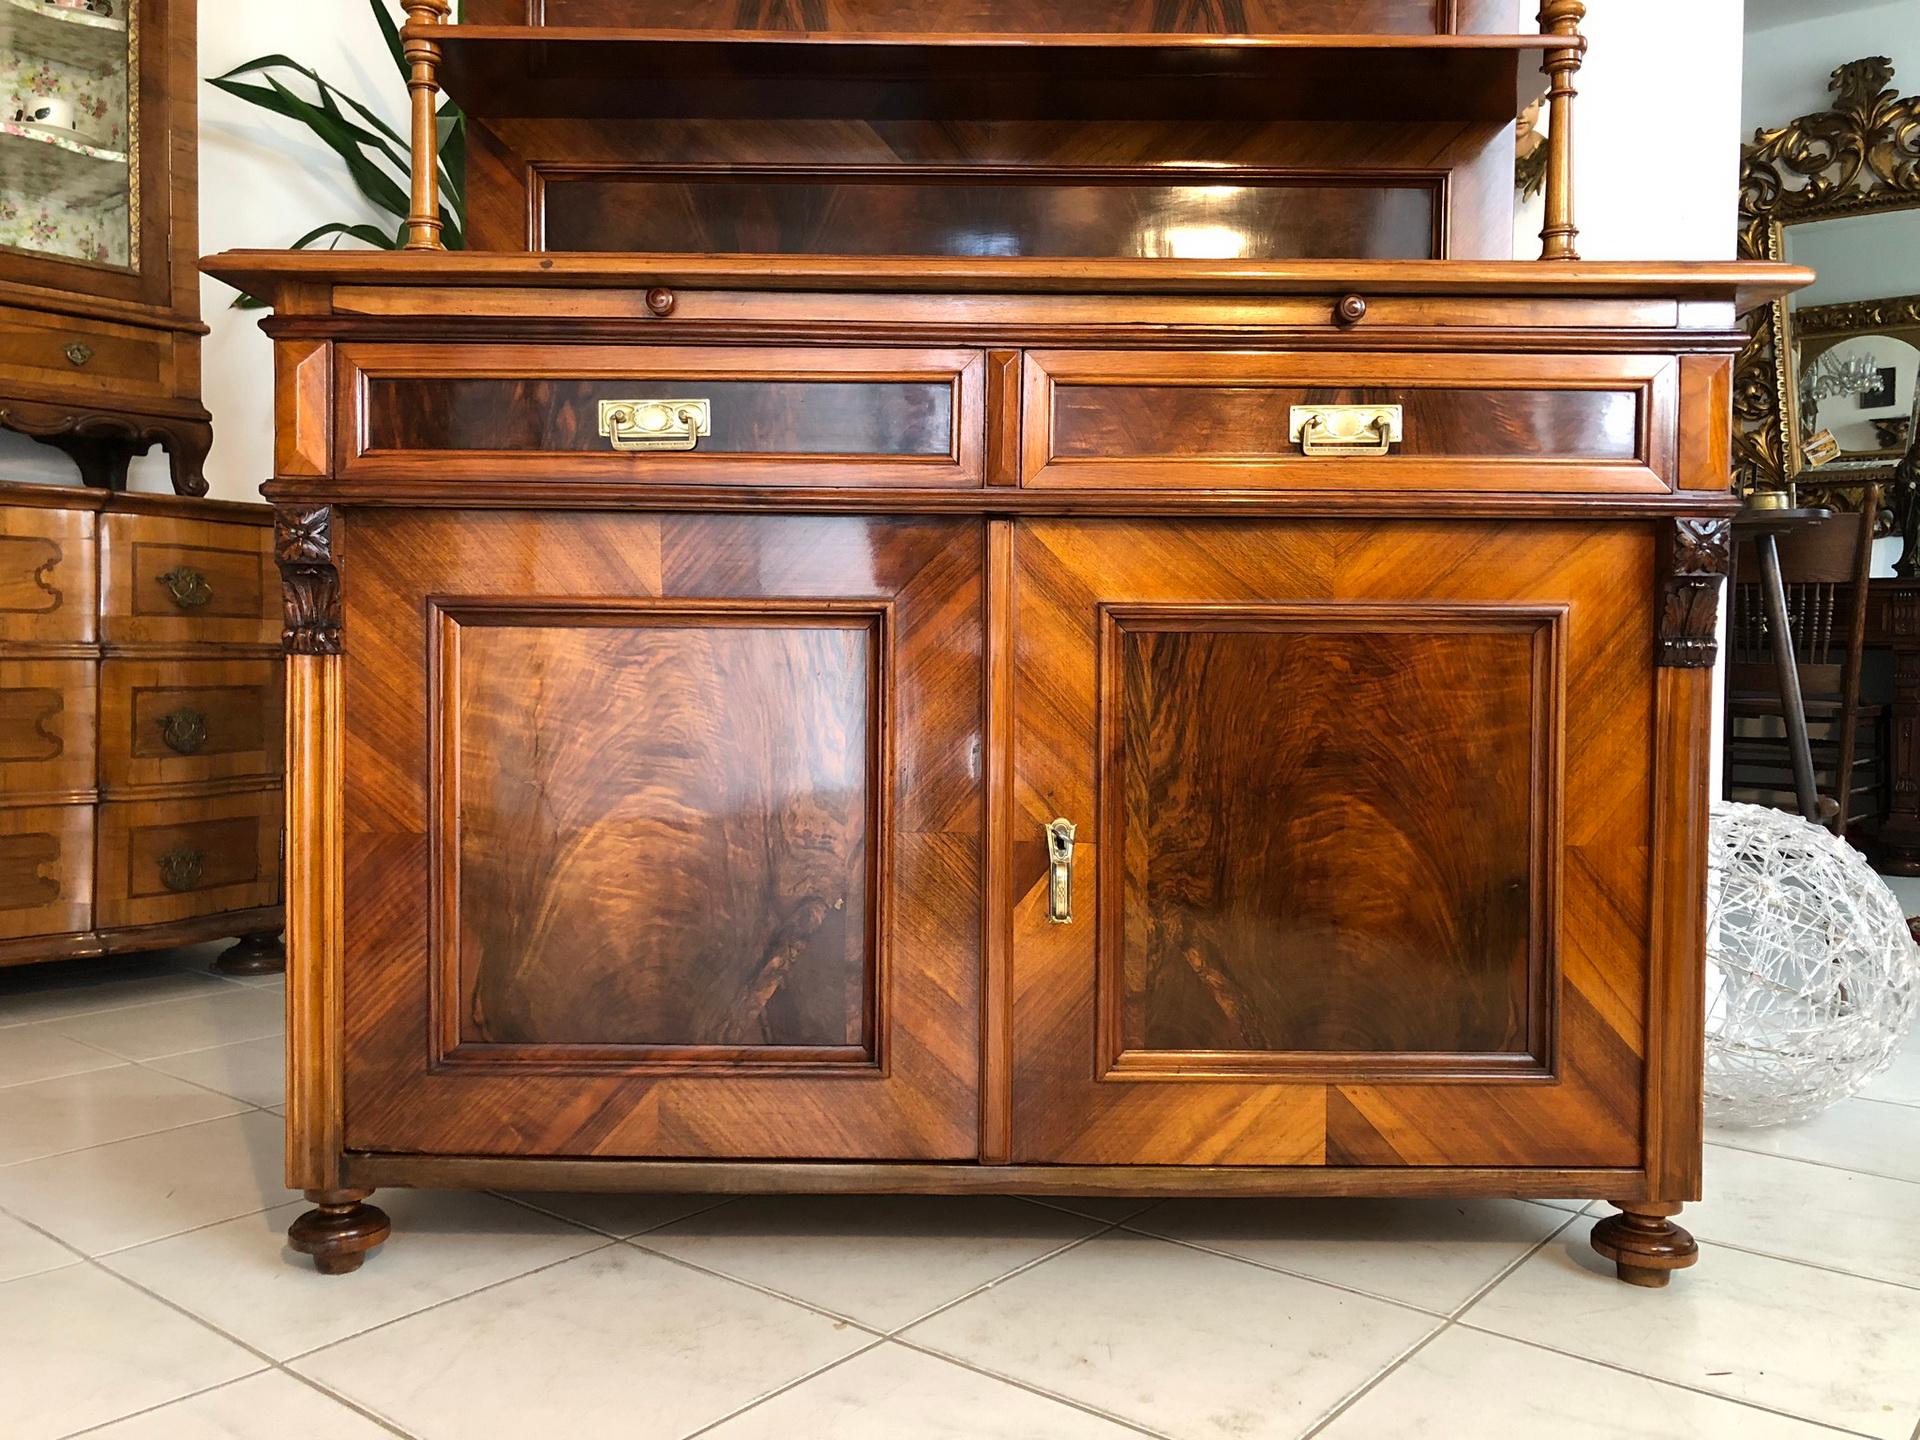 1870s Historicism Buffet with a Walnut Veneer In Excellent Condition For Sale In Senden, NRW